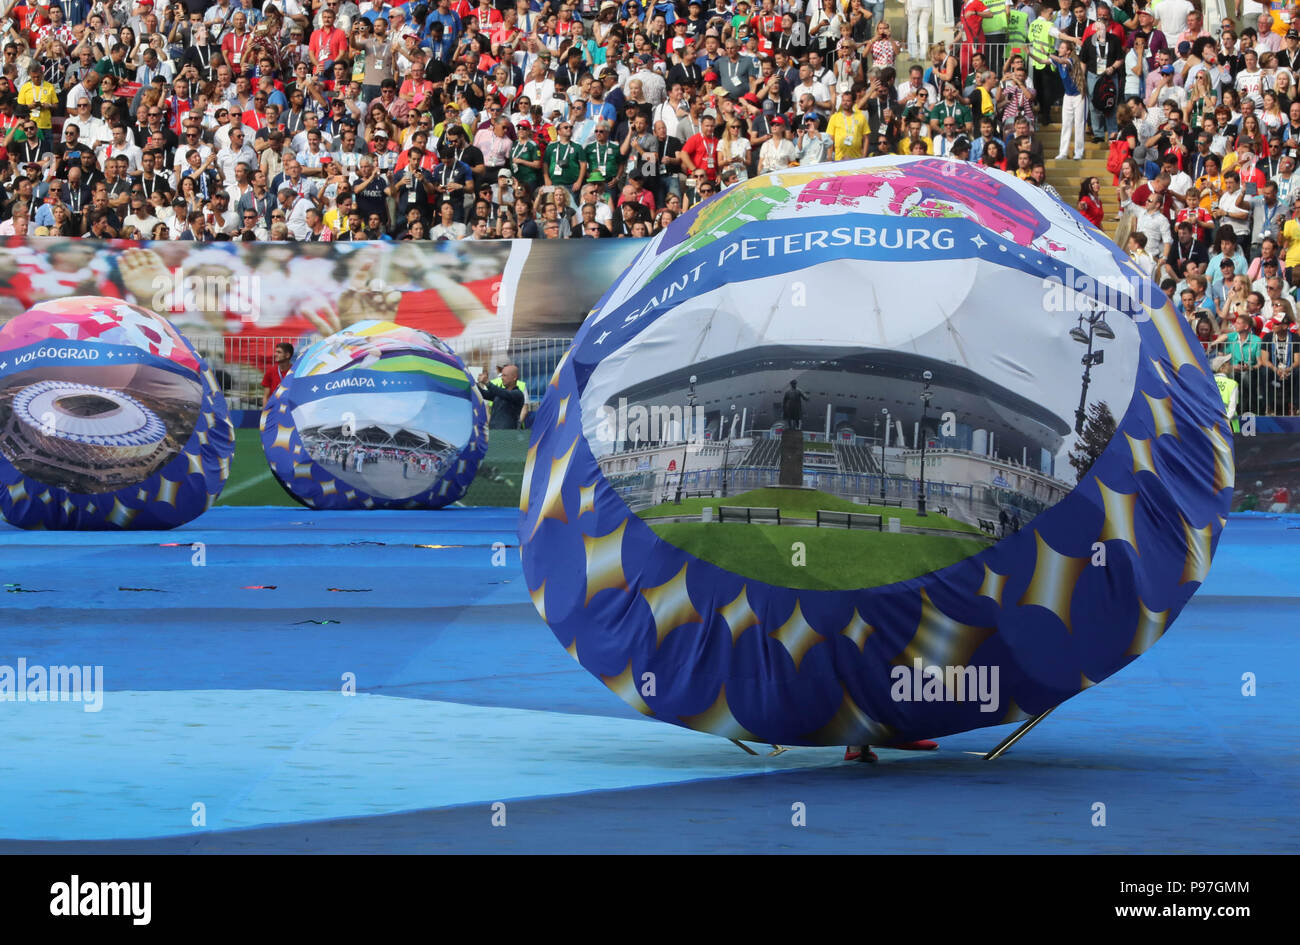 Moscow. 15th July, 2018. Photo taken on July 15, 2018 shows the closing ceremony of the 2018 FIFA World Cup in Moscow, Russia. Credit: Yang Lei/Xinhua/Alamy Live News Stock Photo